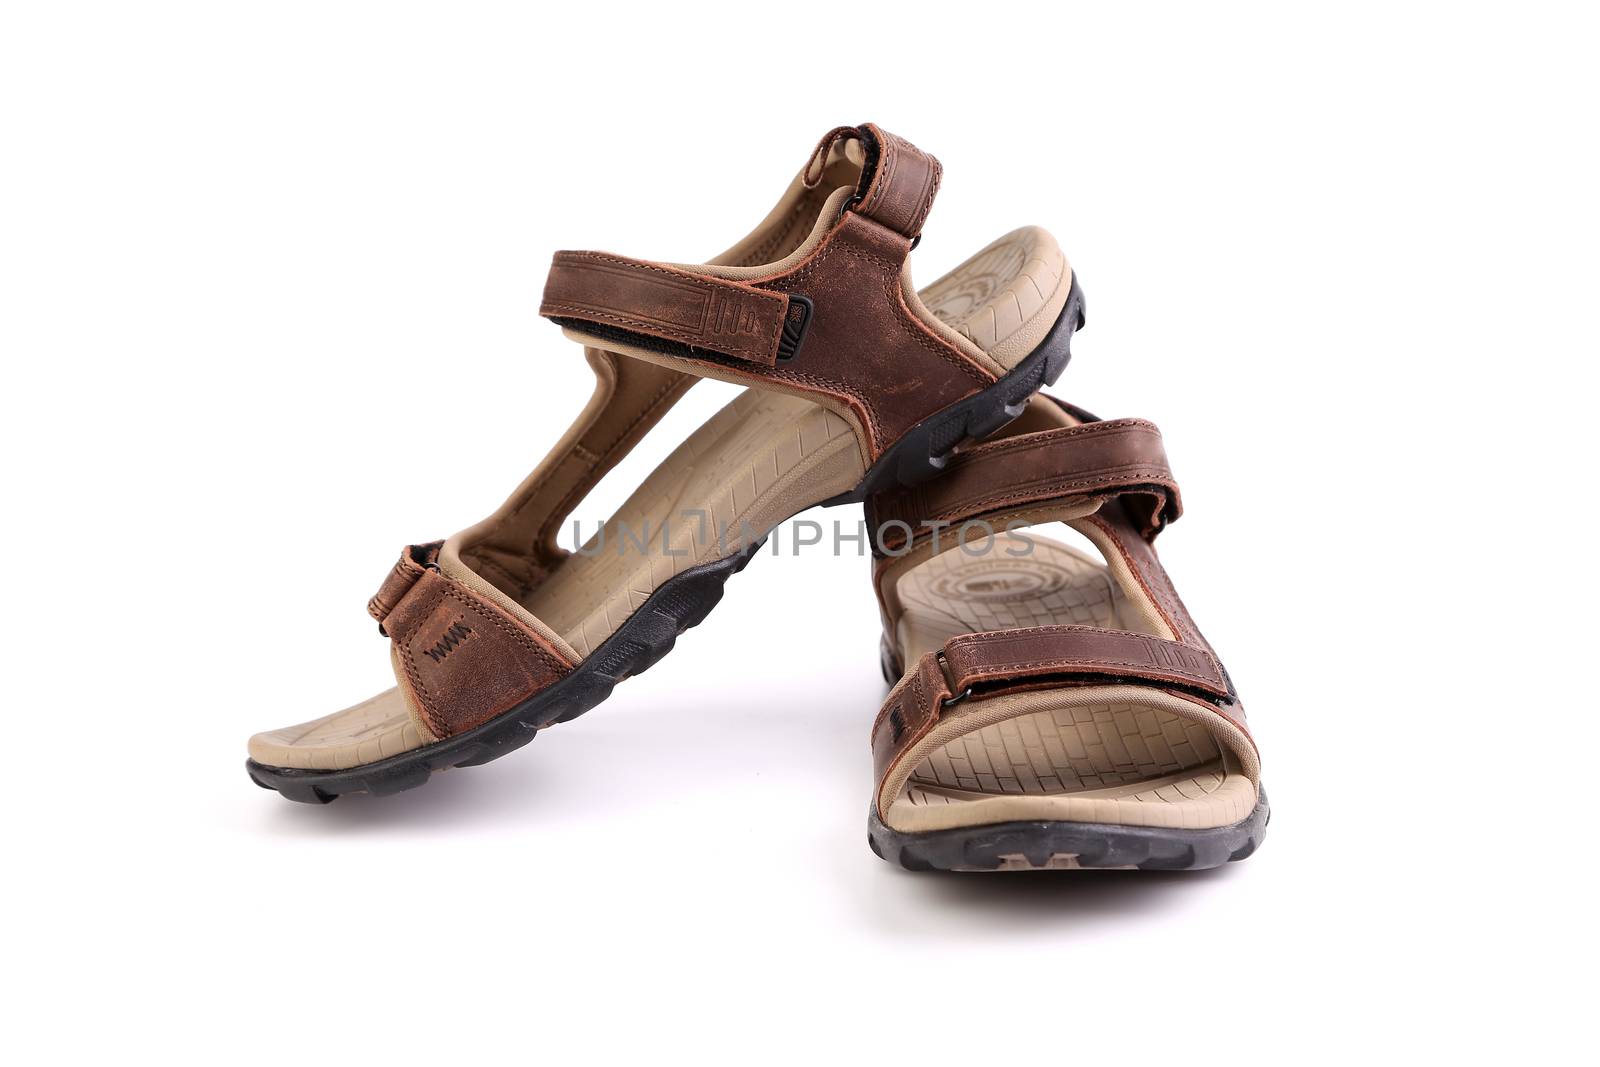 A sport brown sandals isolated on the white background